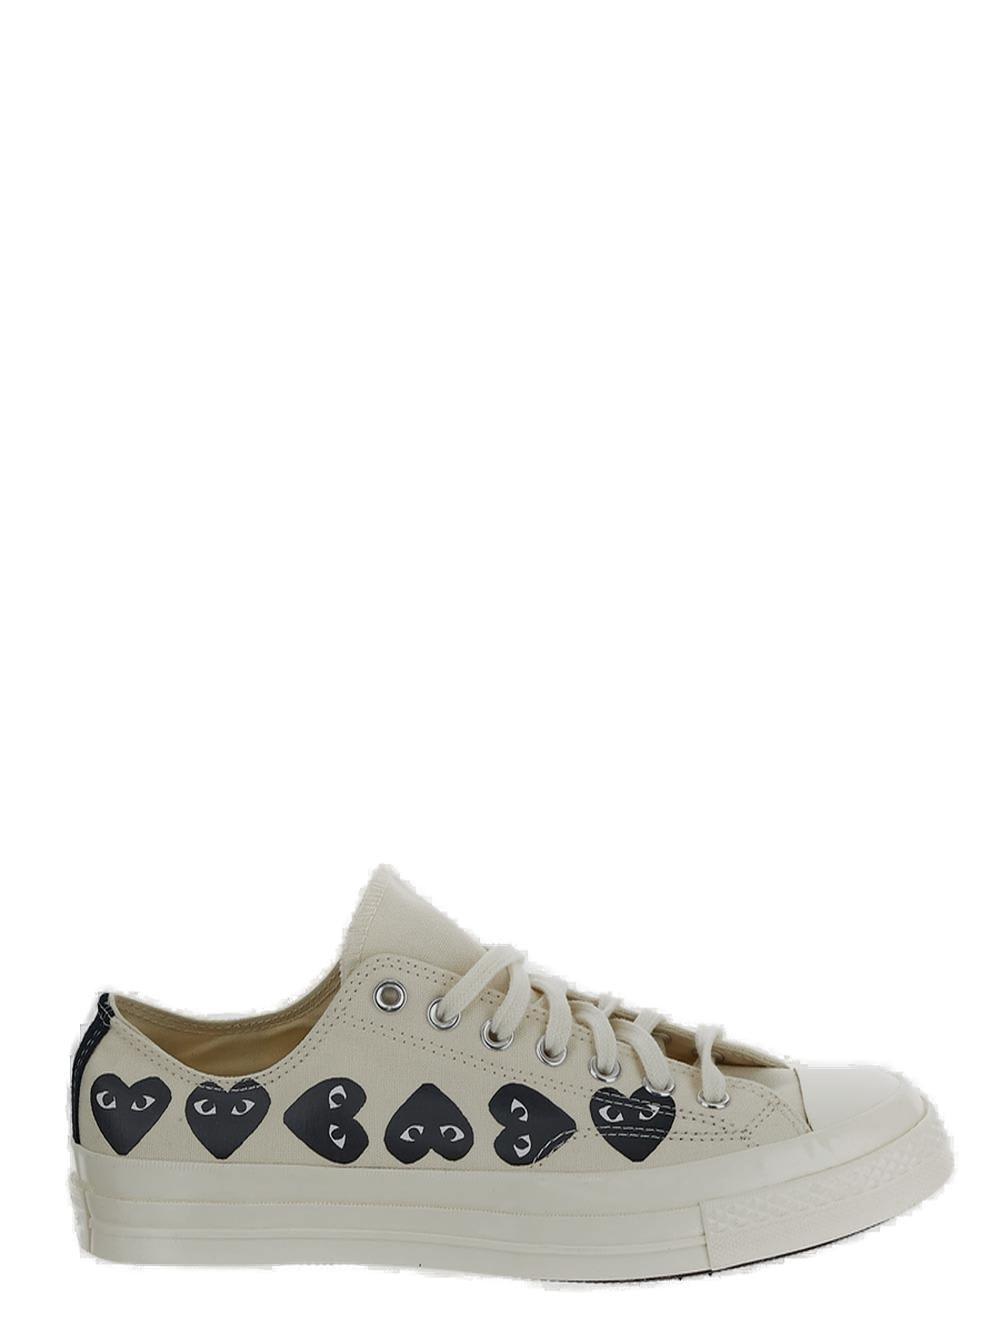 Comme Des Garçons X Converse Chuck 70 Heart Printed Lace-up Sneakers In Neutral